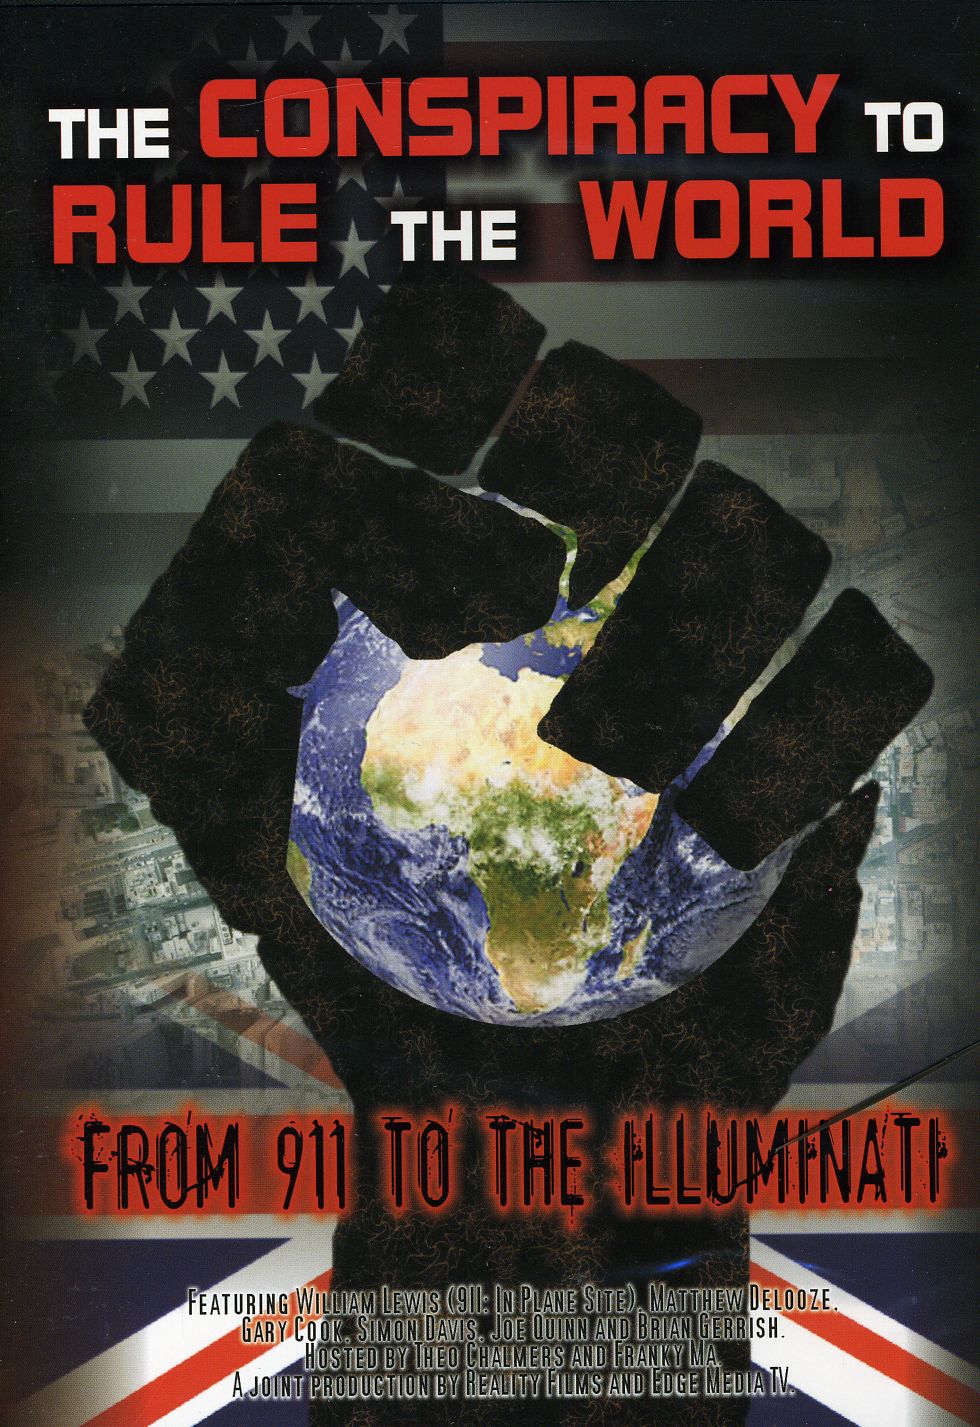 CONSPIRACY TO RULE THE WORLD: FROM 911 TO THE